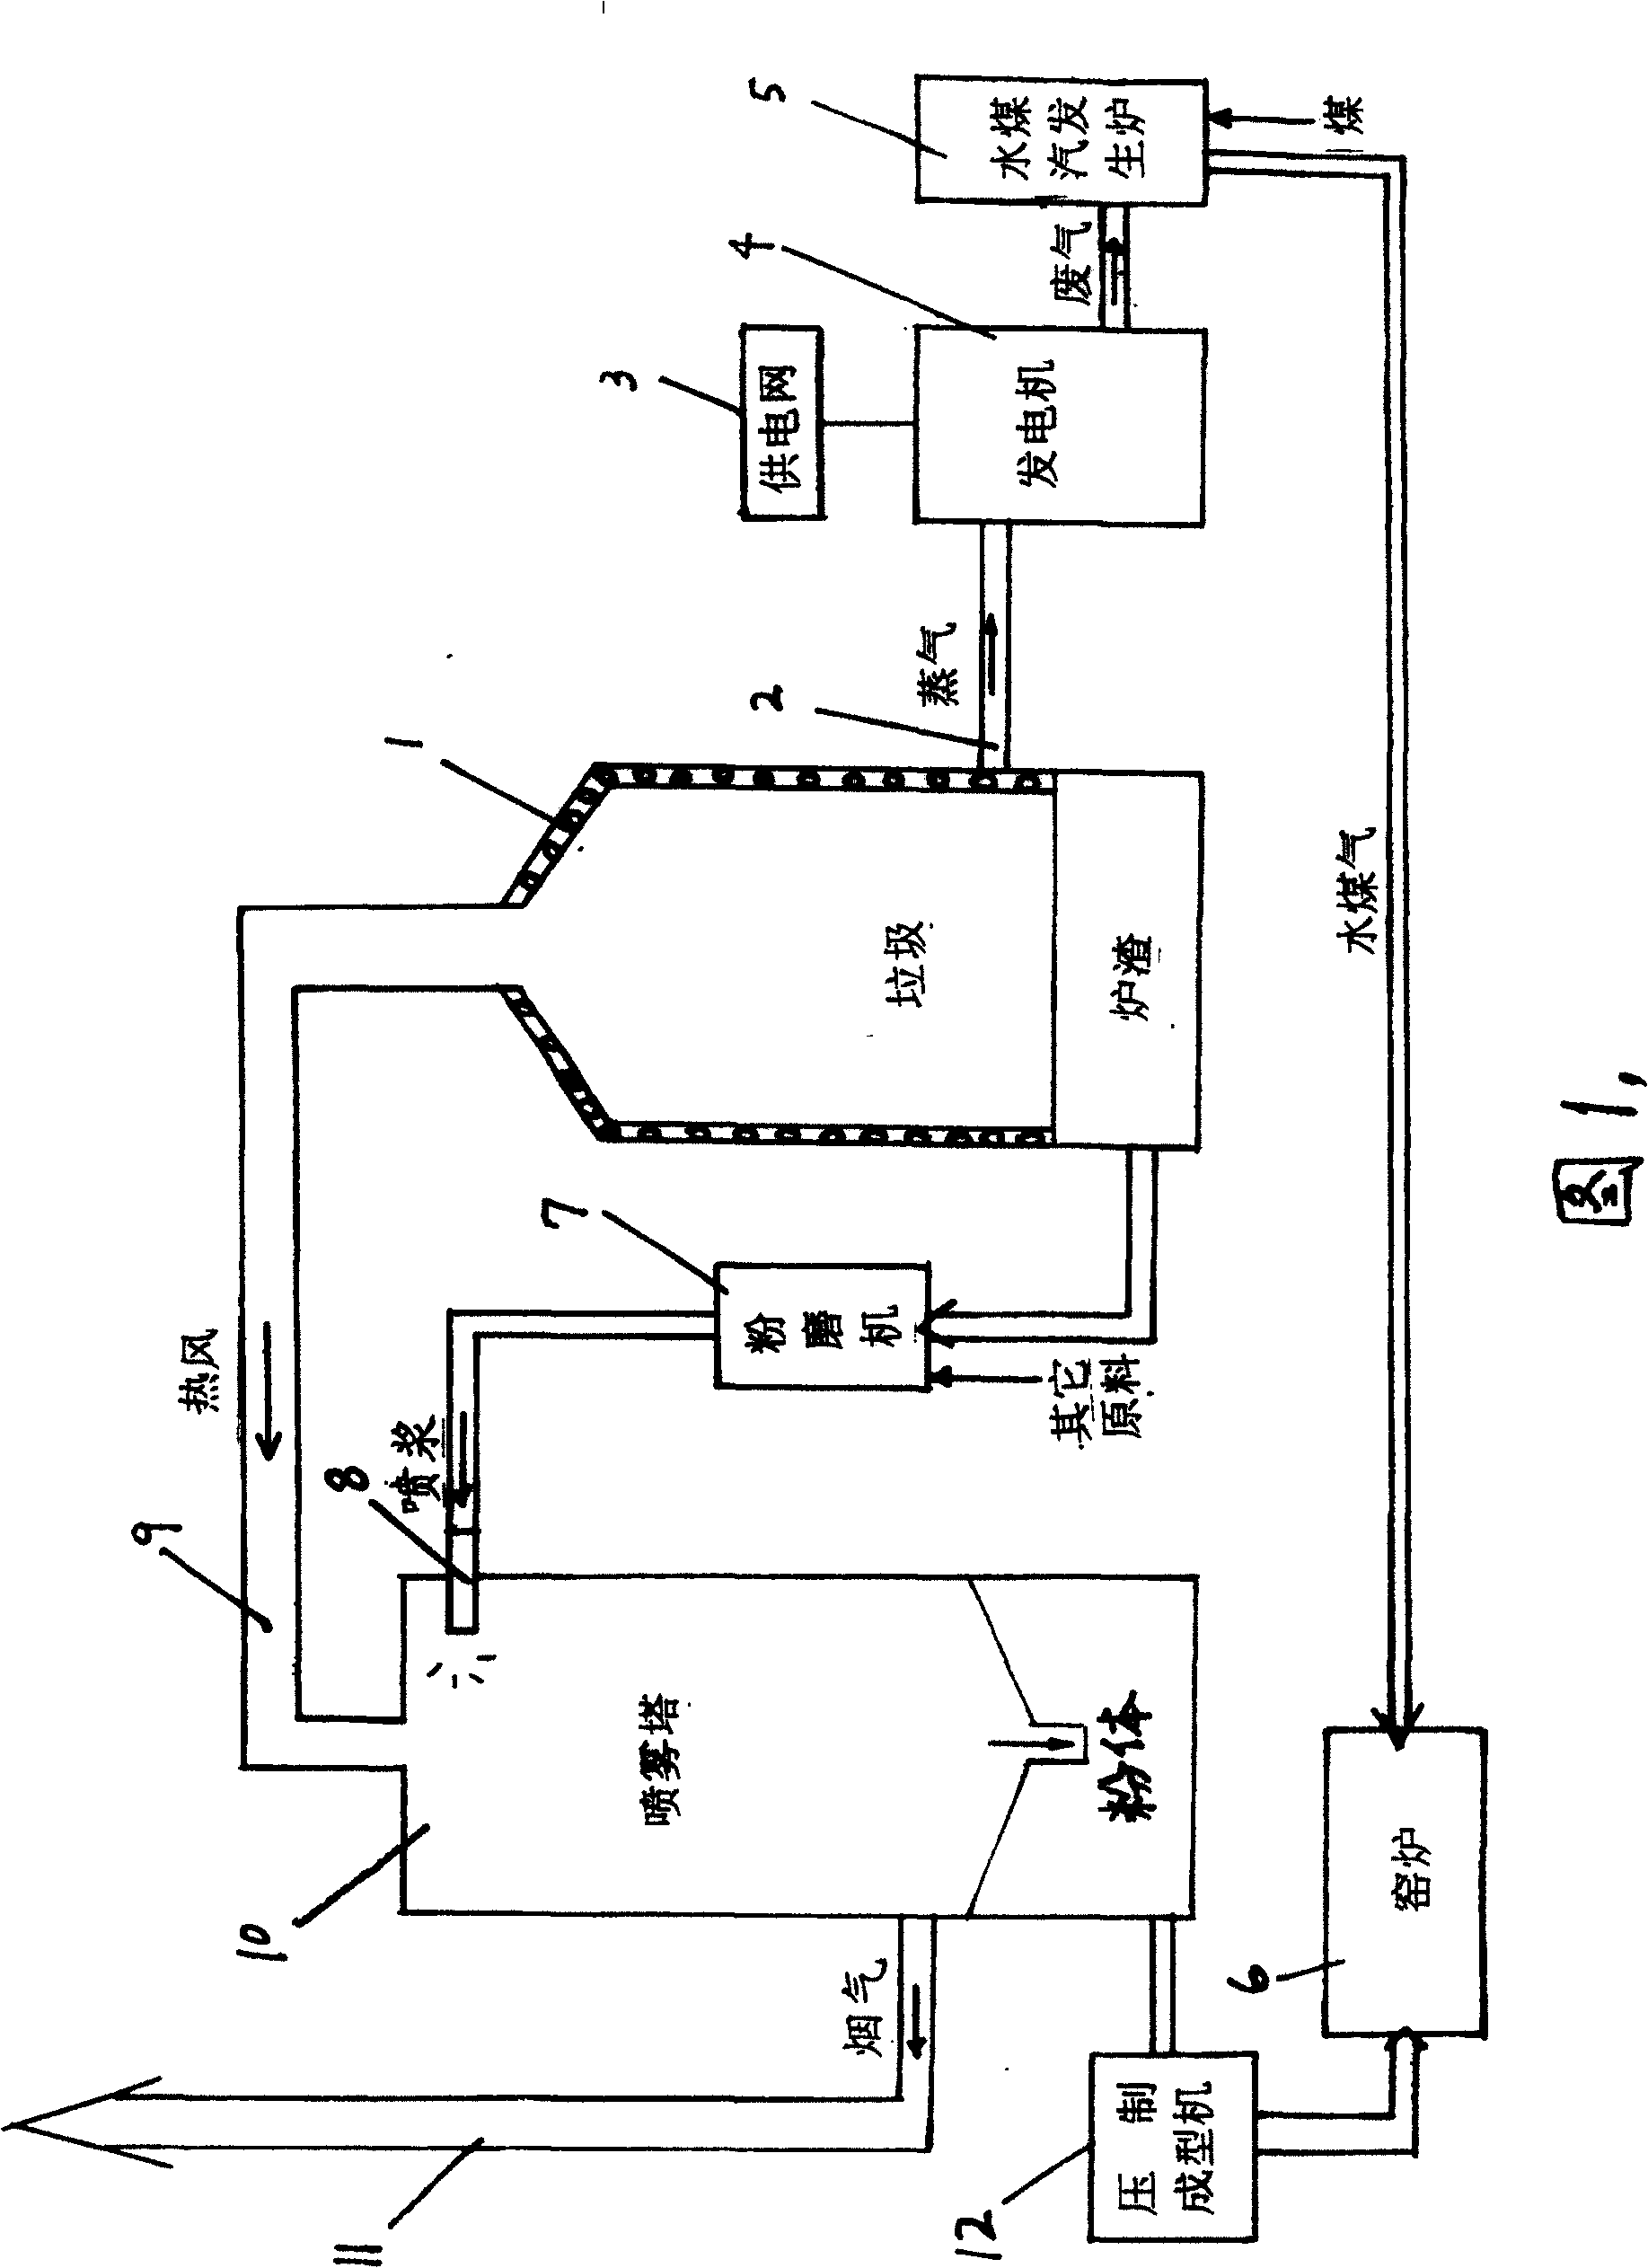 System for producing ceramic tile with coal gangue and domestic garbage